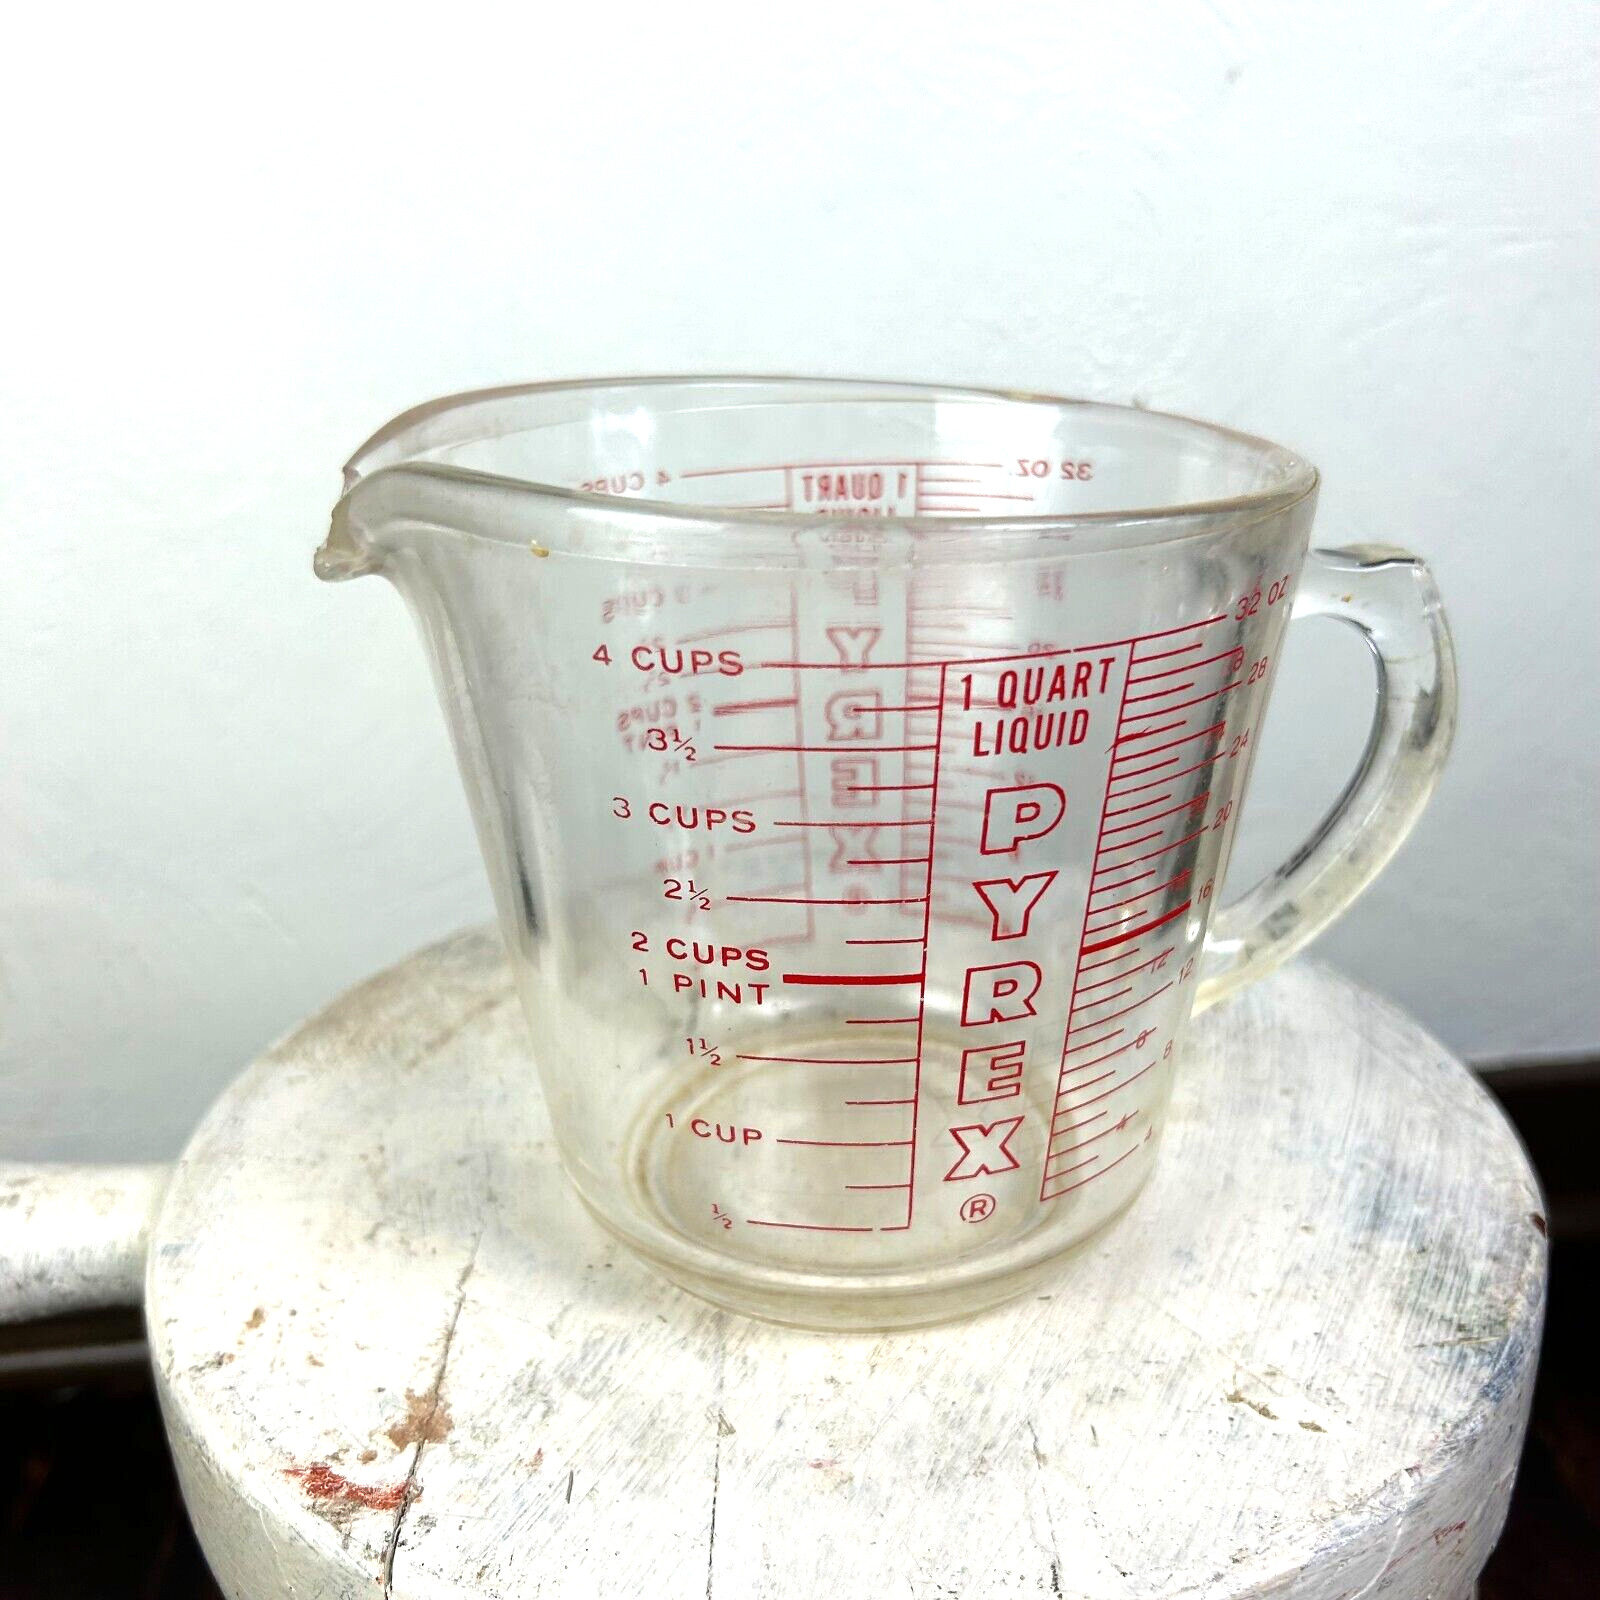 Vintage Pyrex 4 Cup Glass Clear Measuring Cup Handle Red Lettering English Units